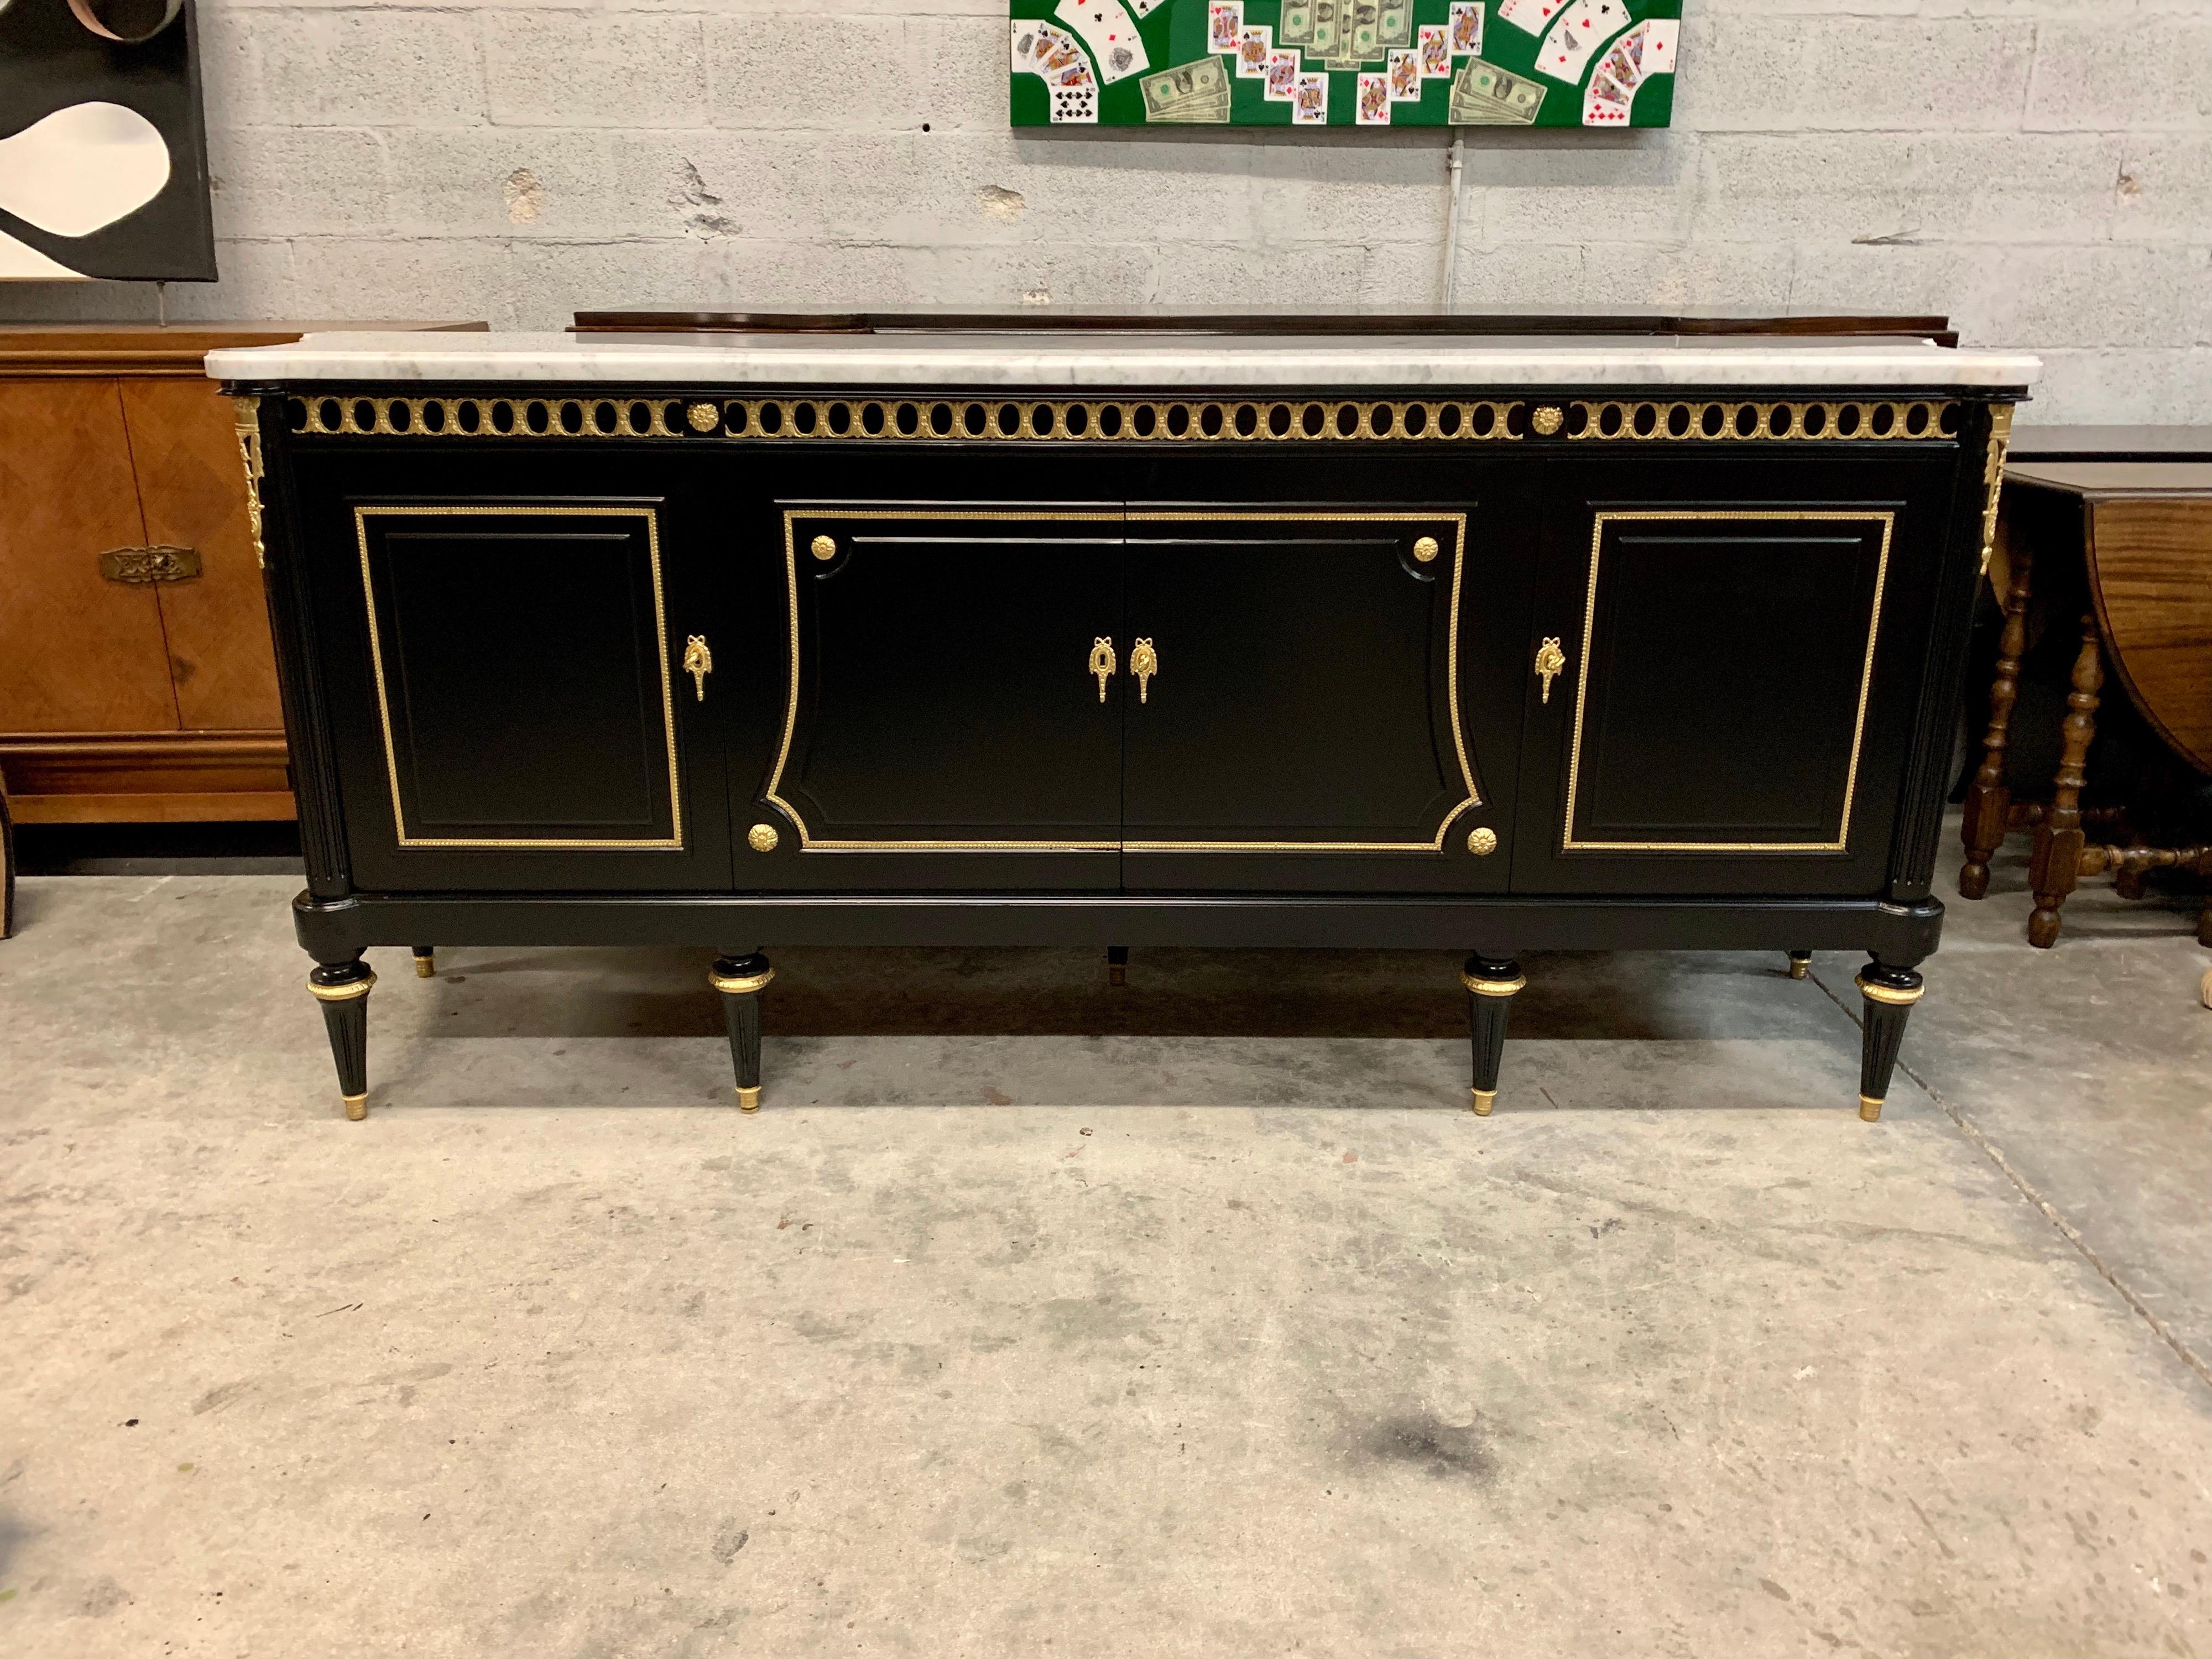 Long French antique Louis XVI style sideboard or buffet made of mahogany with a beautiful Carrara marble top, the mahogany wood has been ebonized and finished with a French polished high luster inside and outside, The buffet has 4 doors and 4